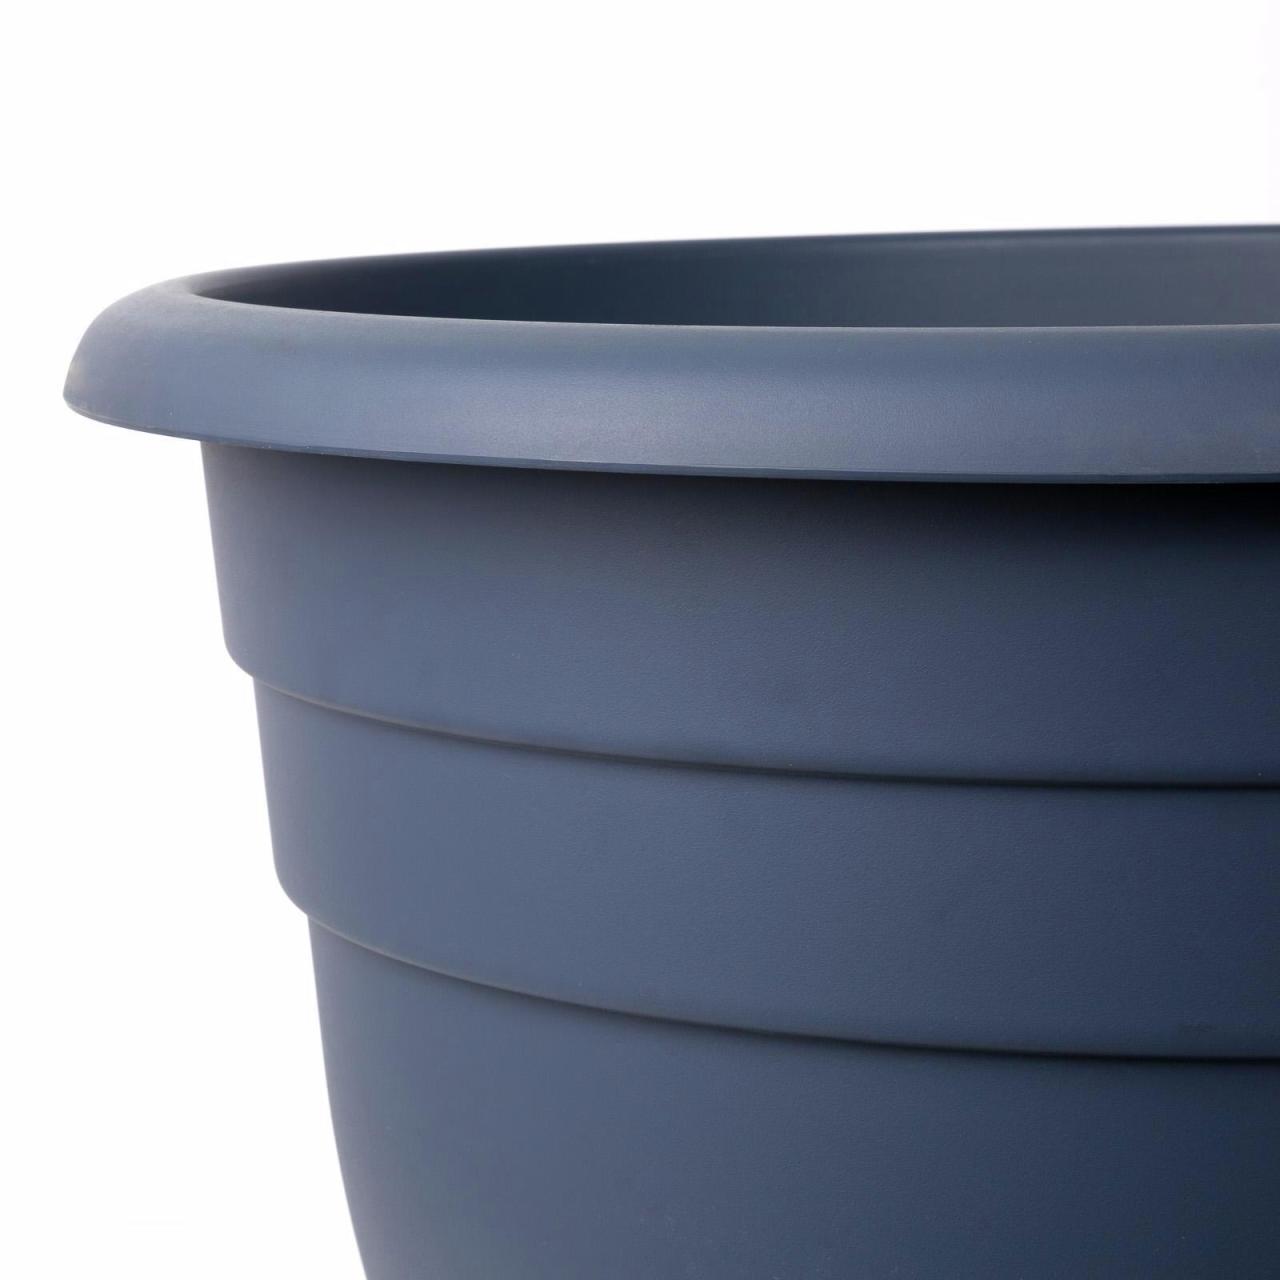 Hanging Plants Indoor | Big Plastic Pots at Bunnings: A Comprehensive Guide for Gardening Enthusiasts